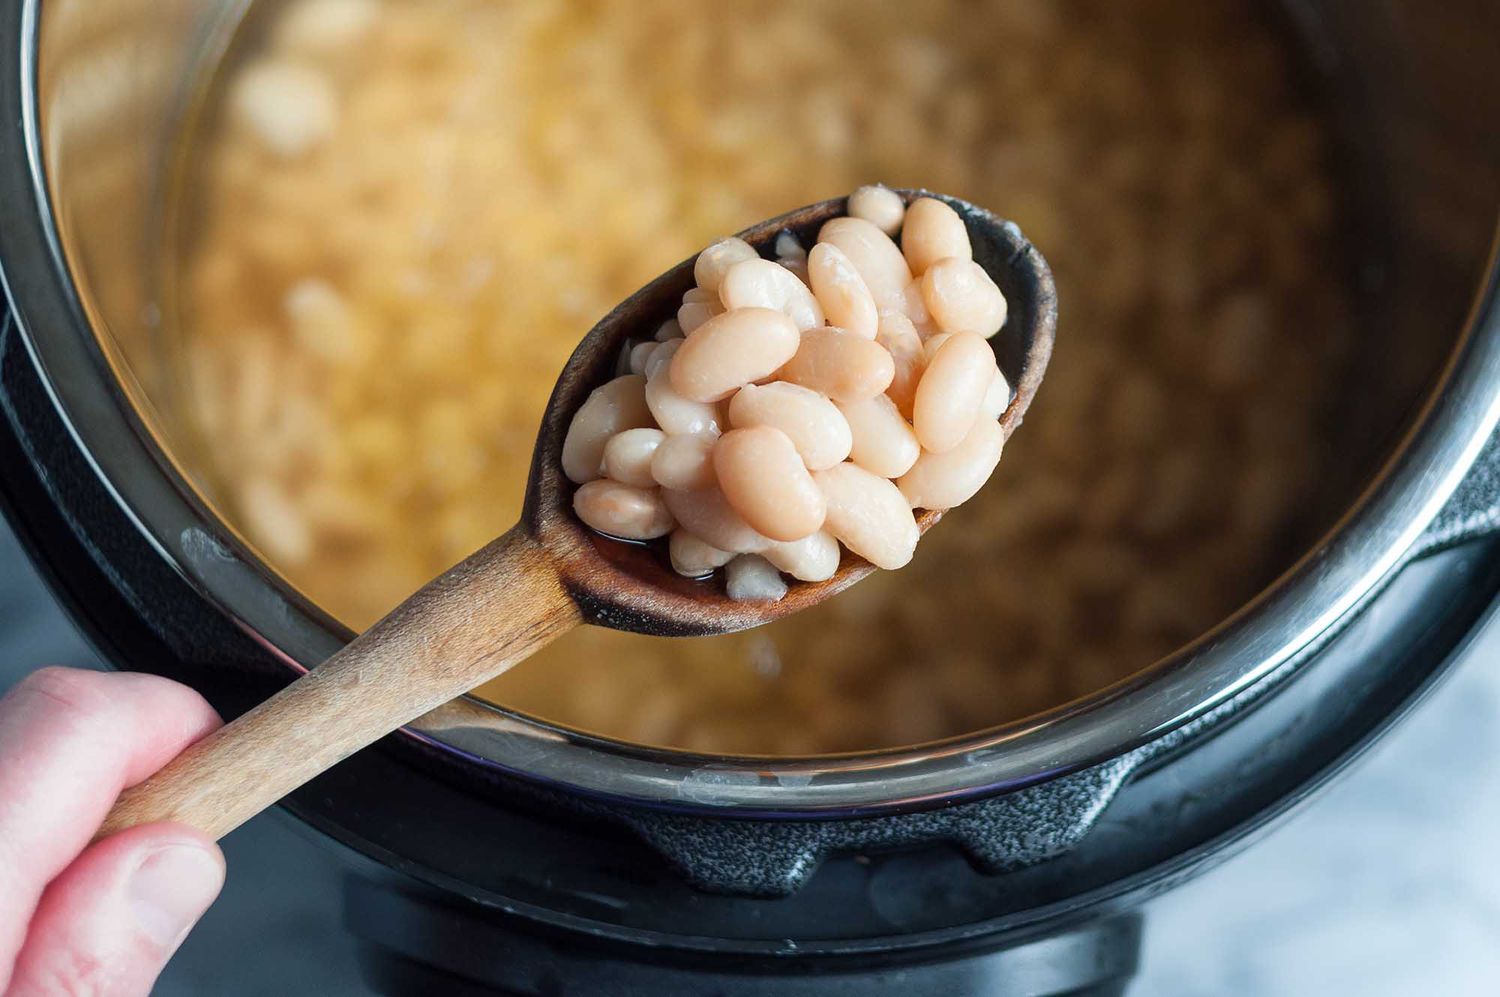 https://storables.com/wp-content/uploads/2023/07/how-to-cook-beans-in-farberware-electric-pressure-cooker-1690591089.jpg